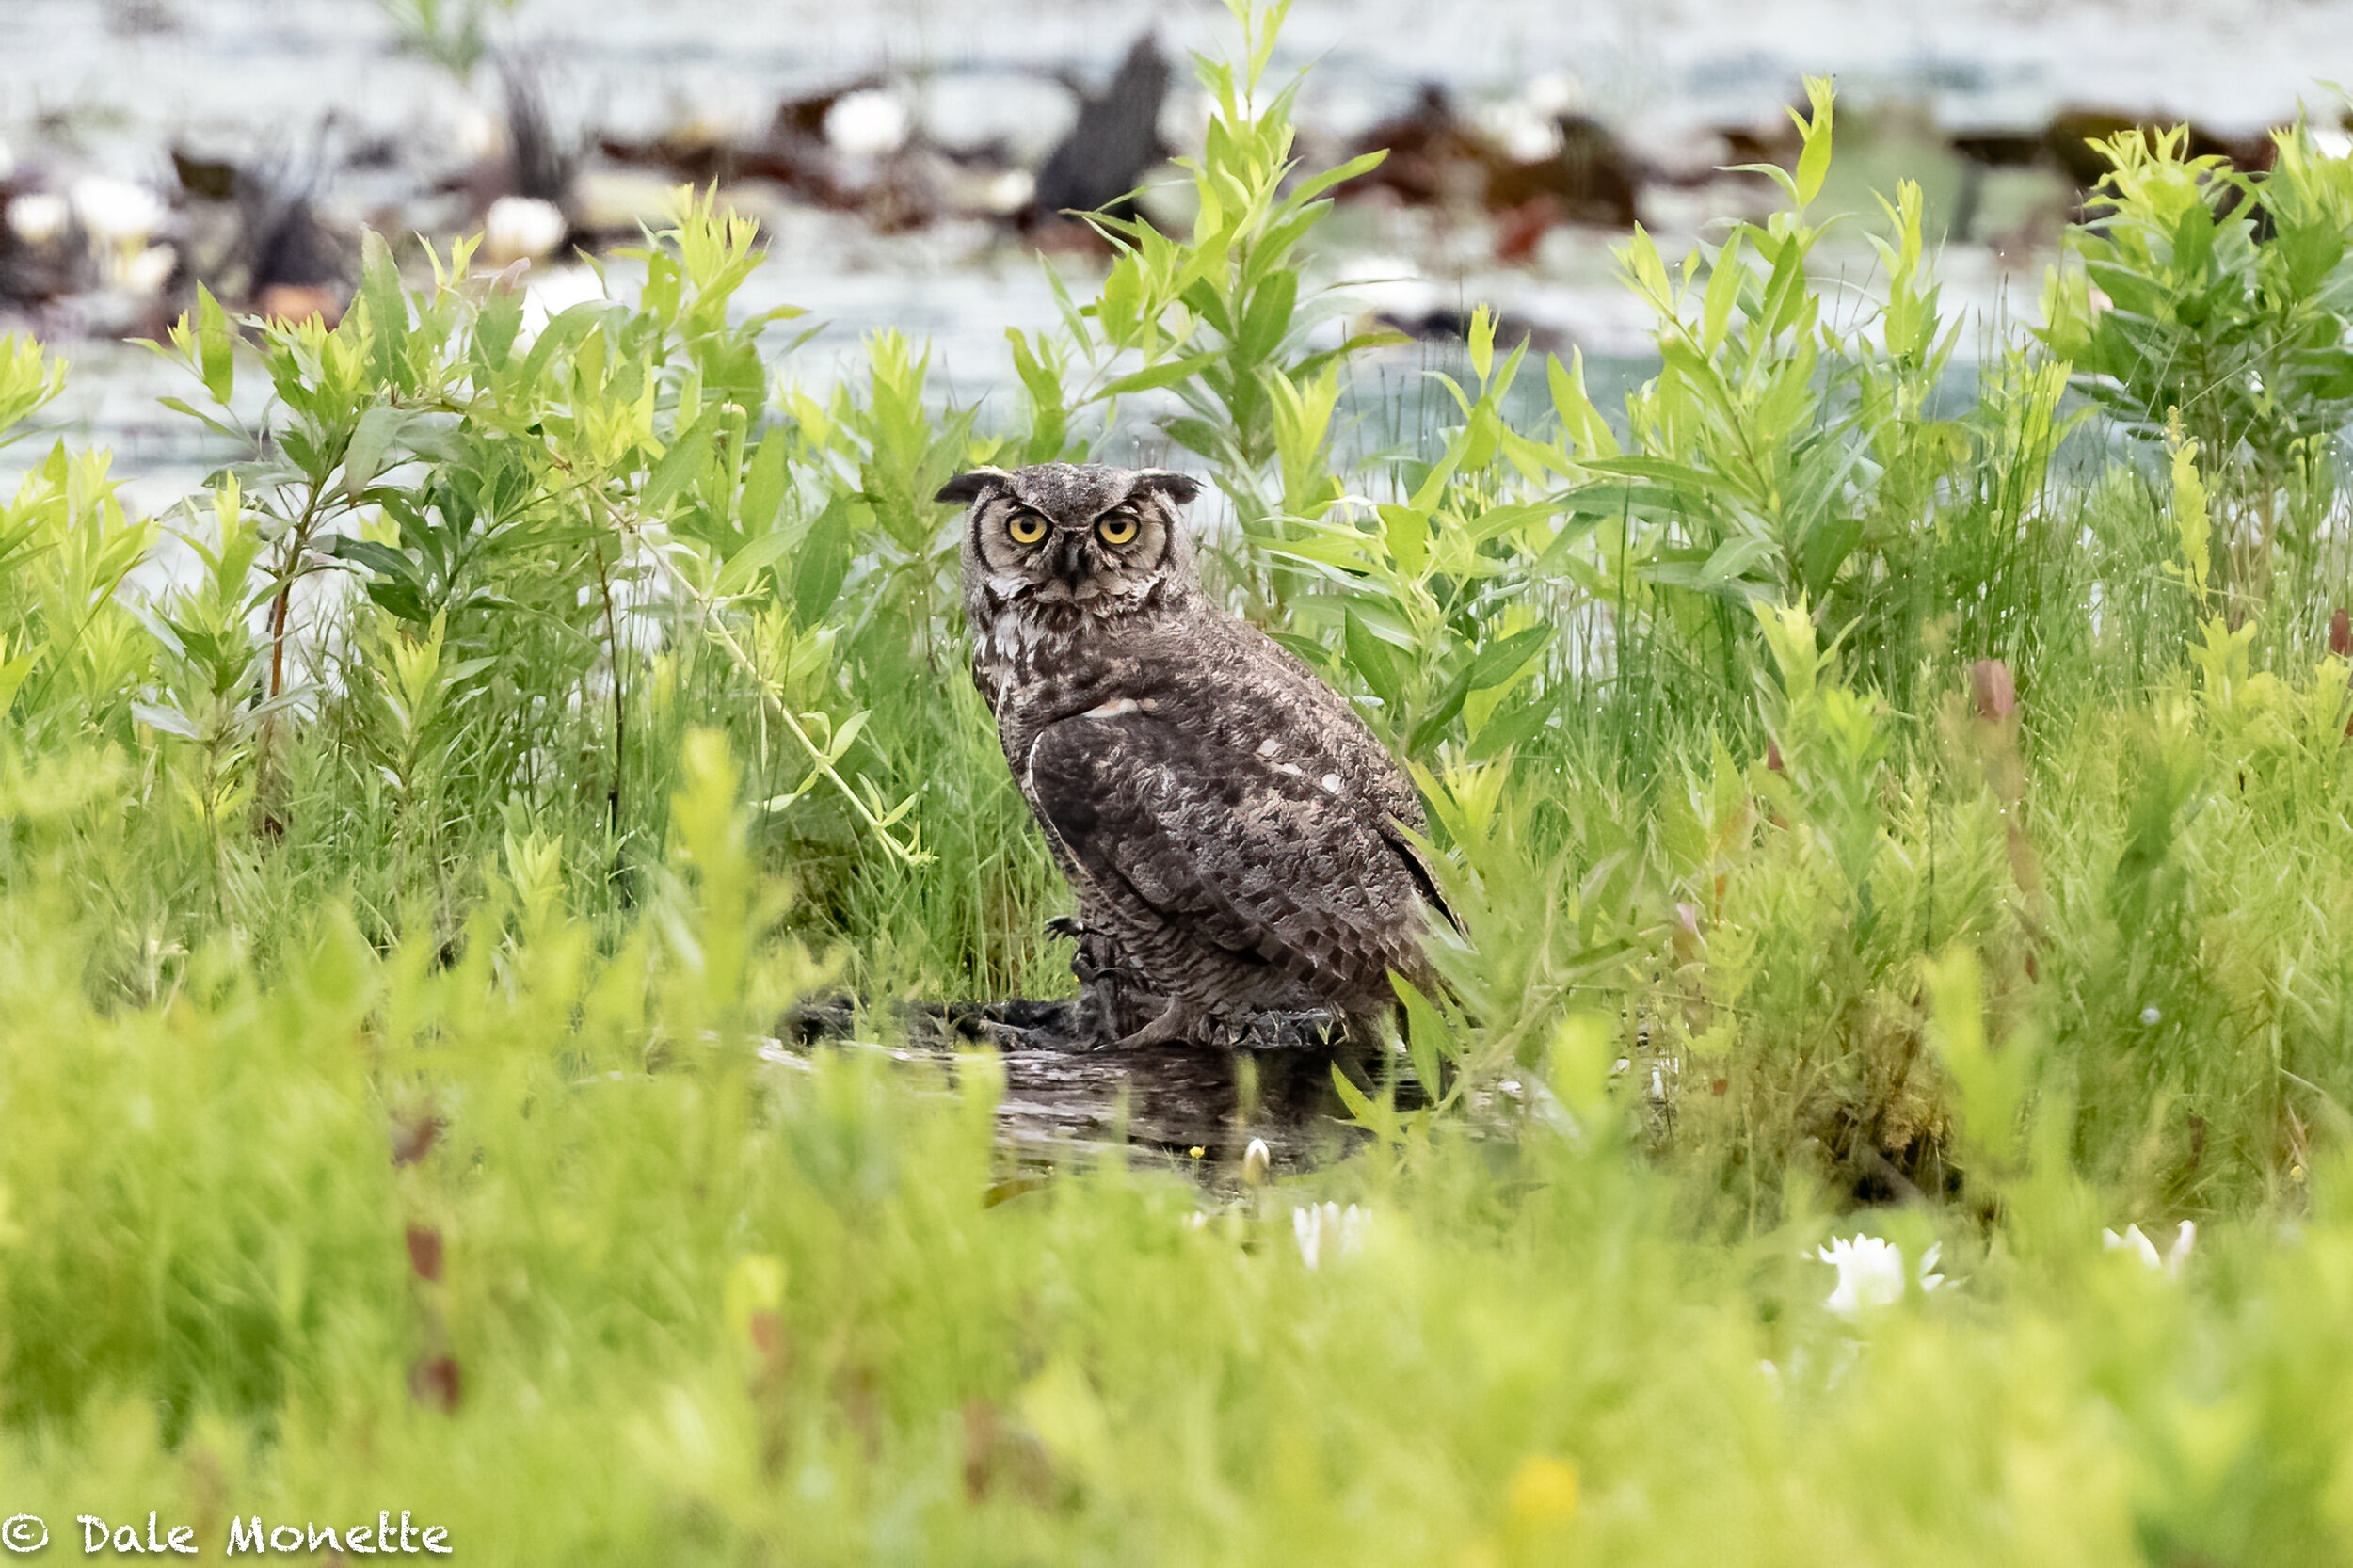   I watched this great horned owl hunt along the shoreline of a local swamp.  After about 90 minutes it landed a large Norway rat and was only about 30 yards from me when he caught it.   